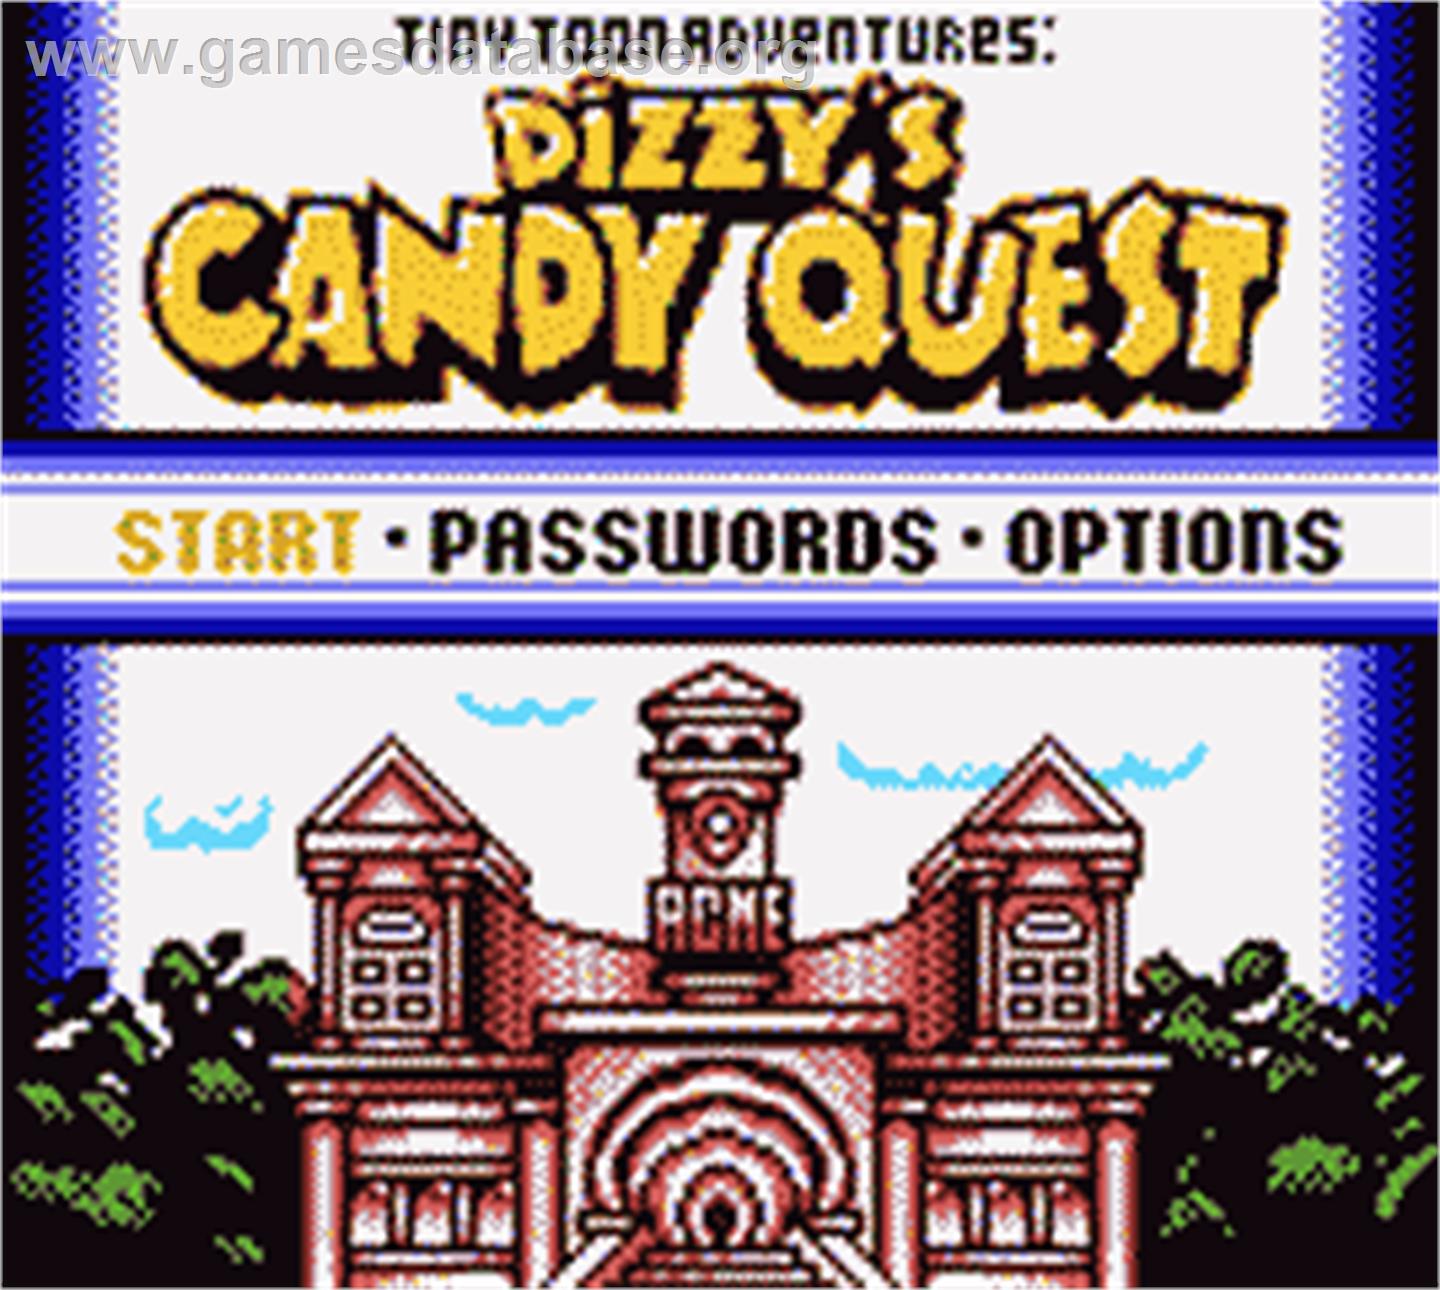 Tiny Toon Adventures: Dizzy's Candy Quest - Nintendo Game Boy Color - Artwork - Title Screen